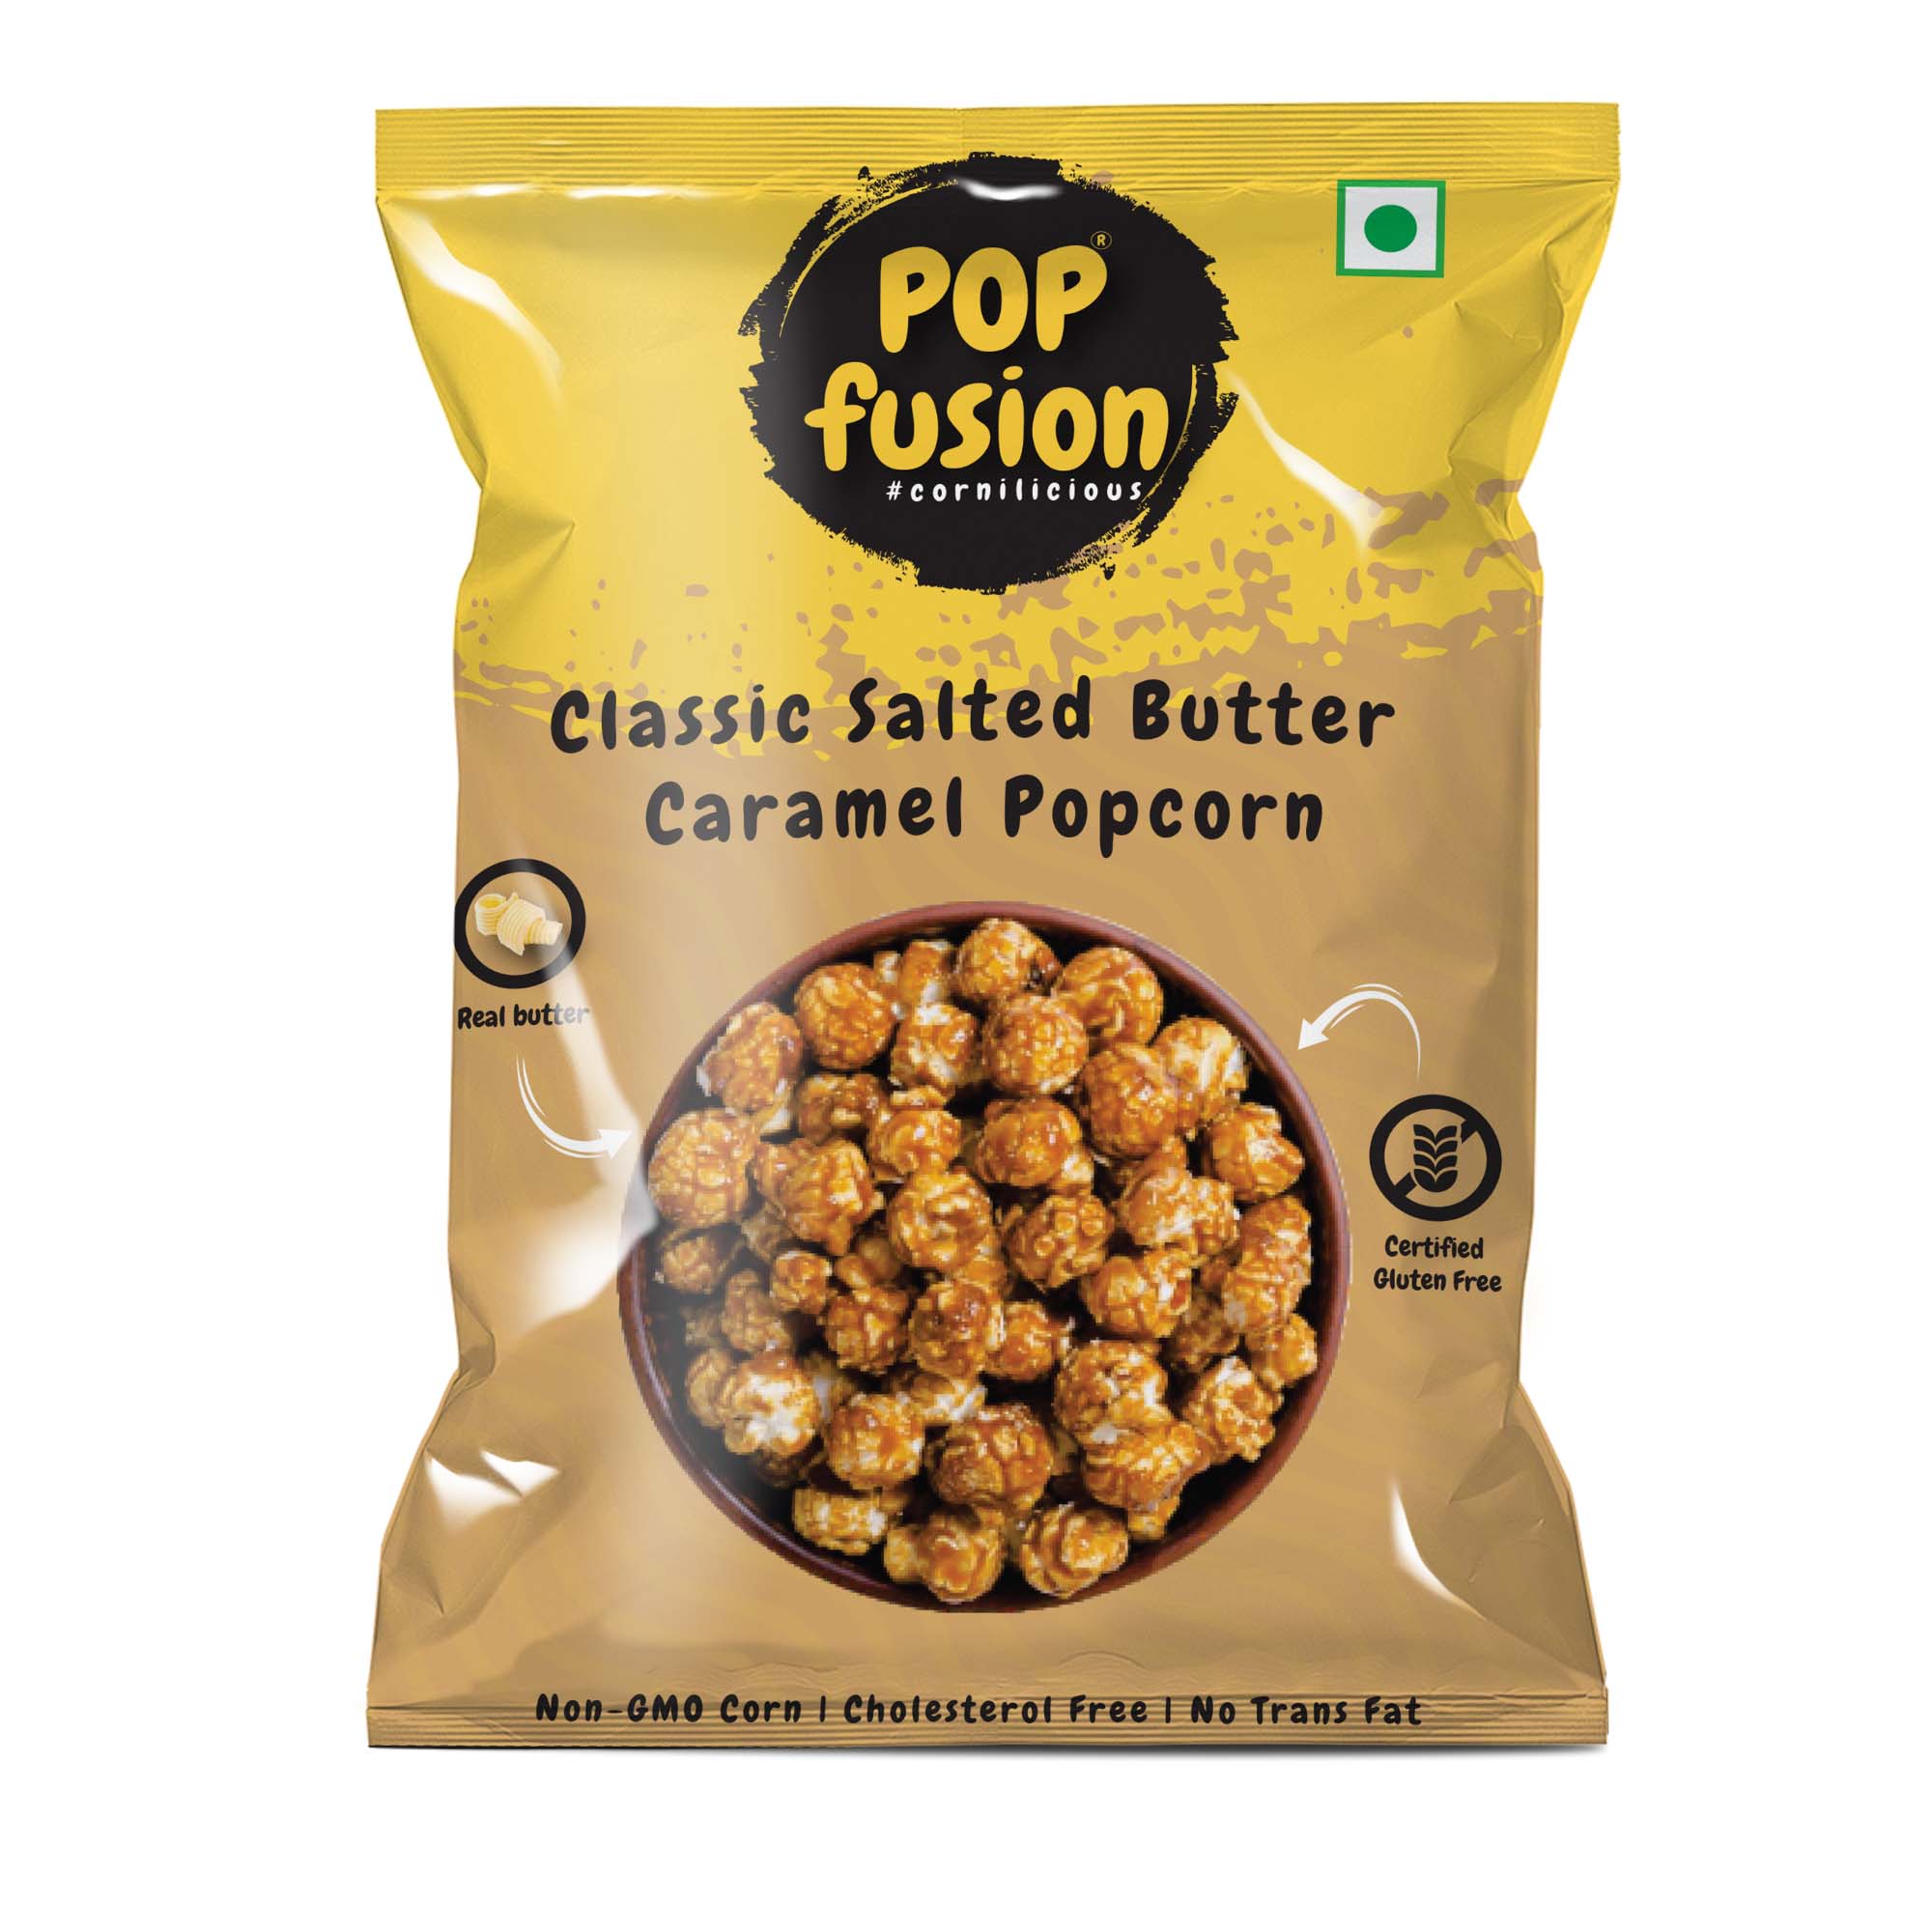 Classic Salted Butter Caramel Popcorn Pack of 5 Pouch, 240g